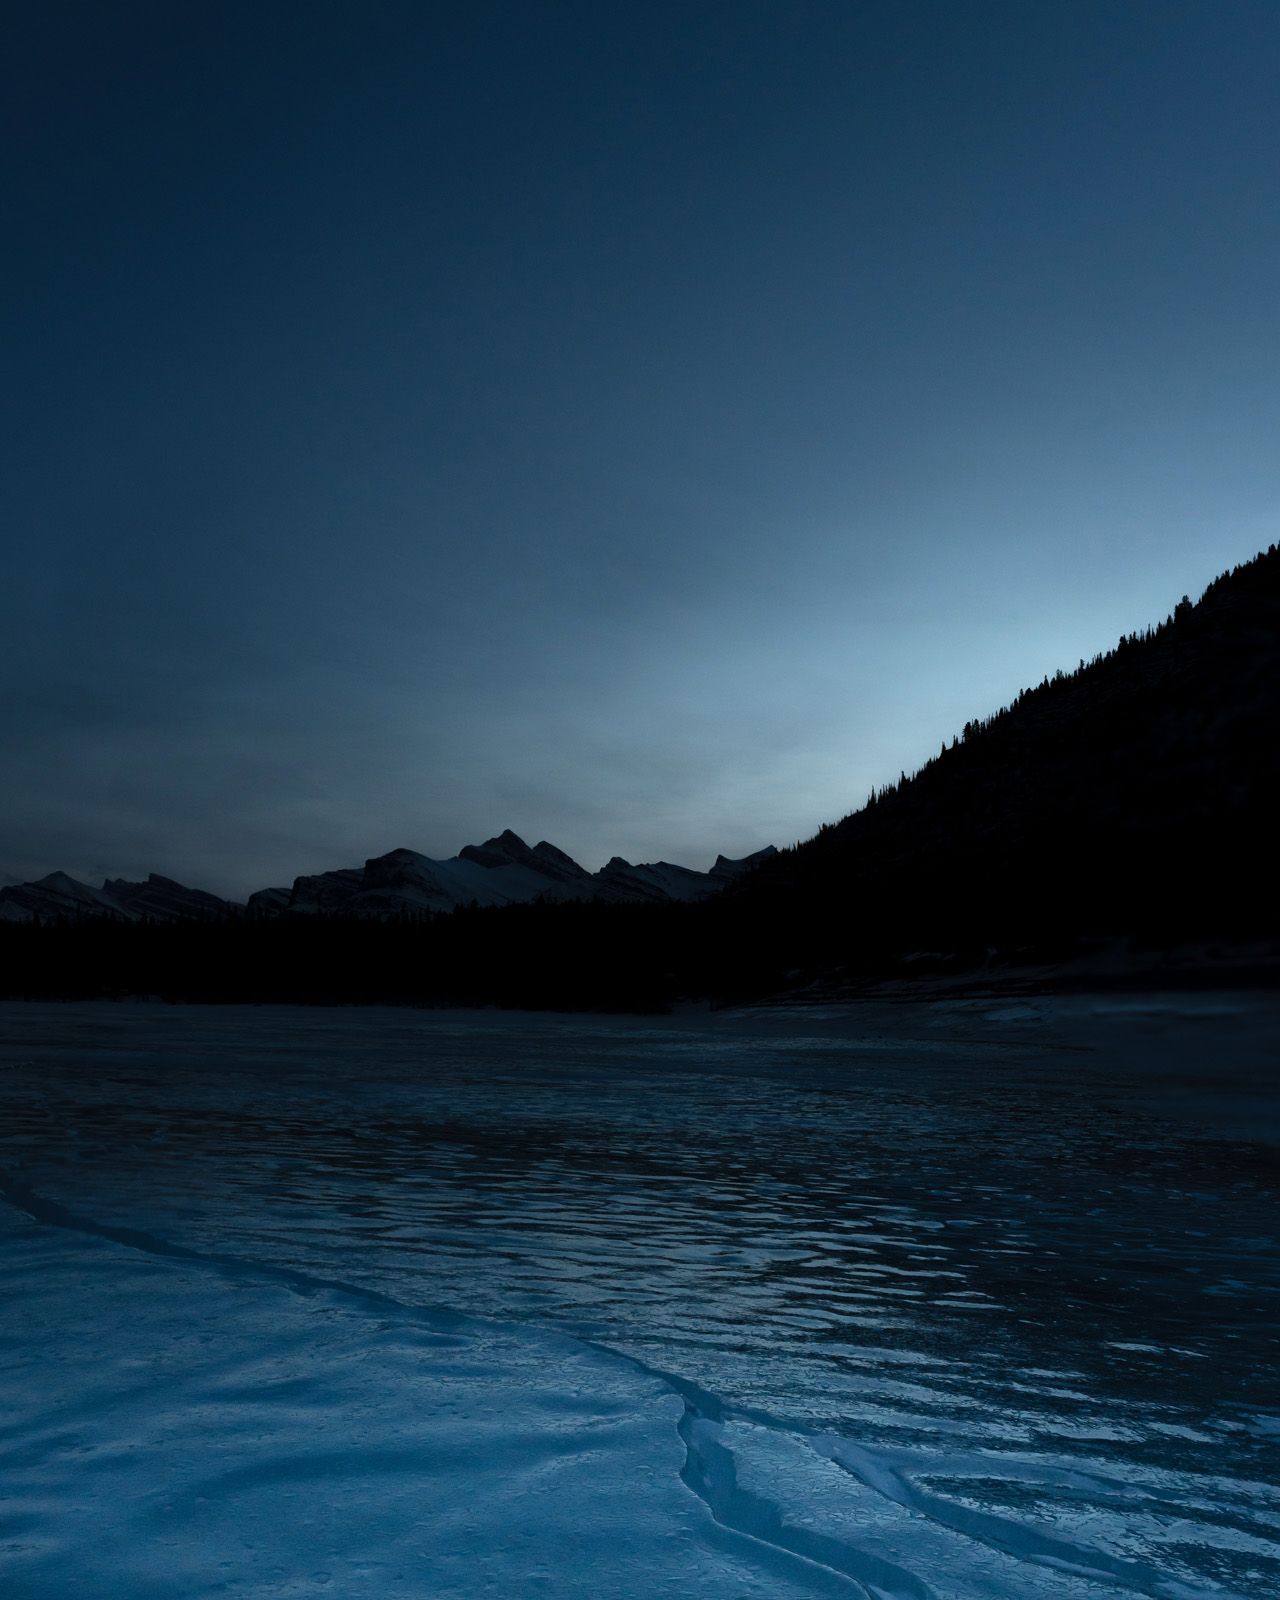 Blue hour approaches at Abraham Lake, Alberta, Canada.